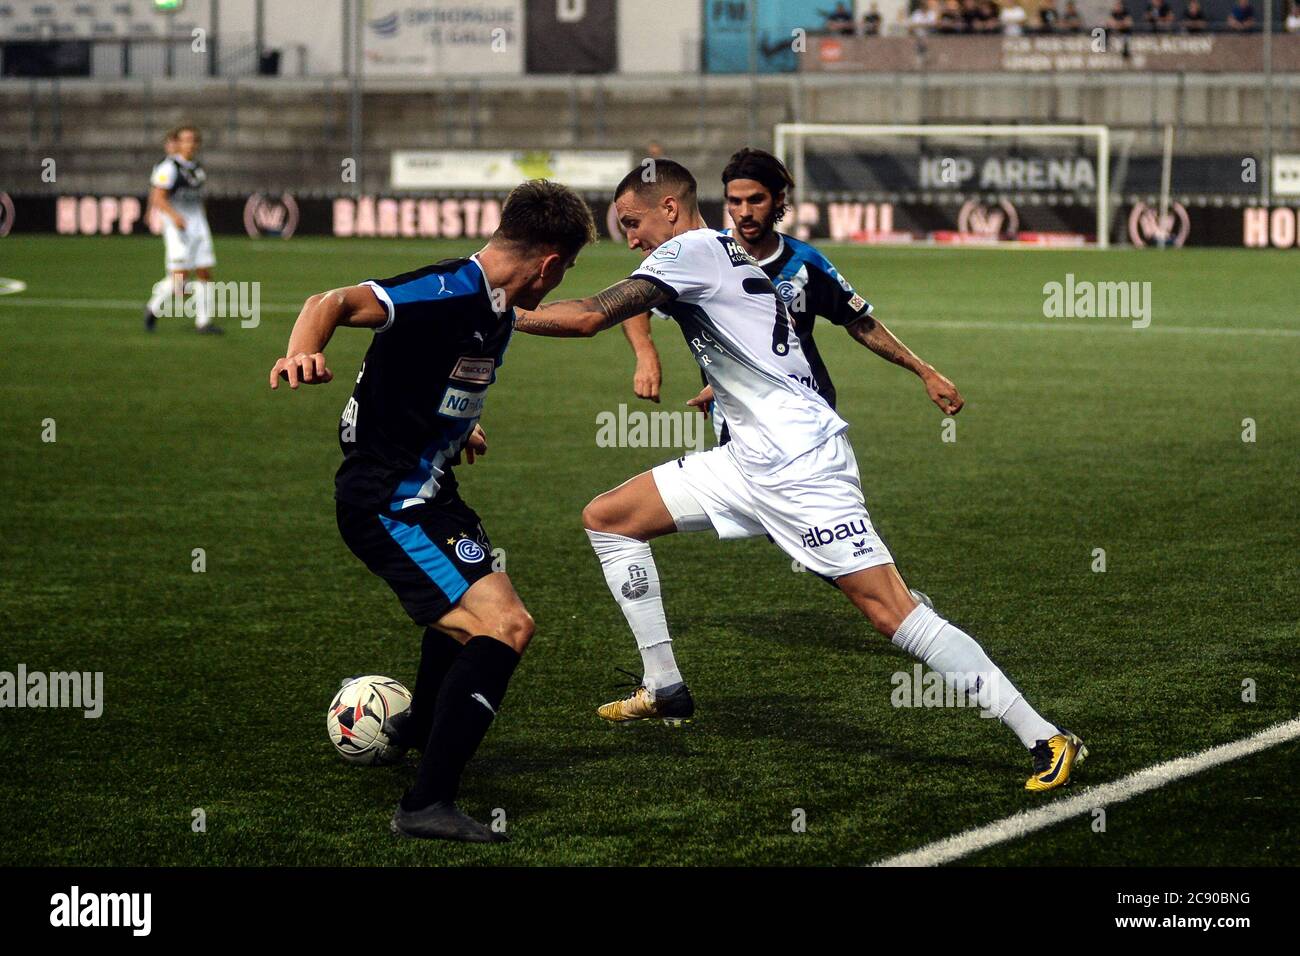 Wil, Schweiz. 27th July, 2020. 27.07.2020, Wil, IGP Arena, Fc Wil vs GCZ, italian Wil's midfielder Andrea Padula in action Credit: SPP Sport Press Photo. /Alamy Live News Stock Photo